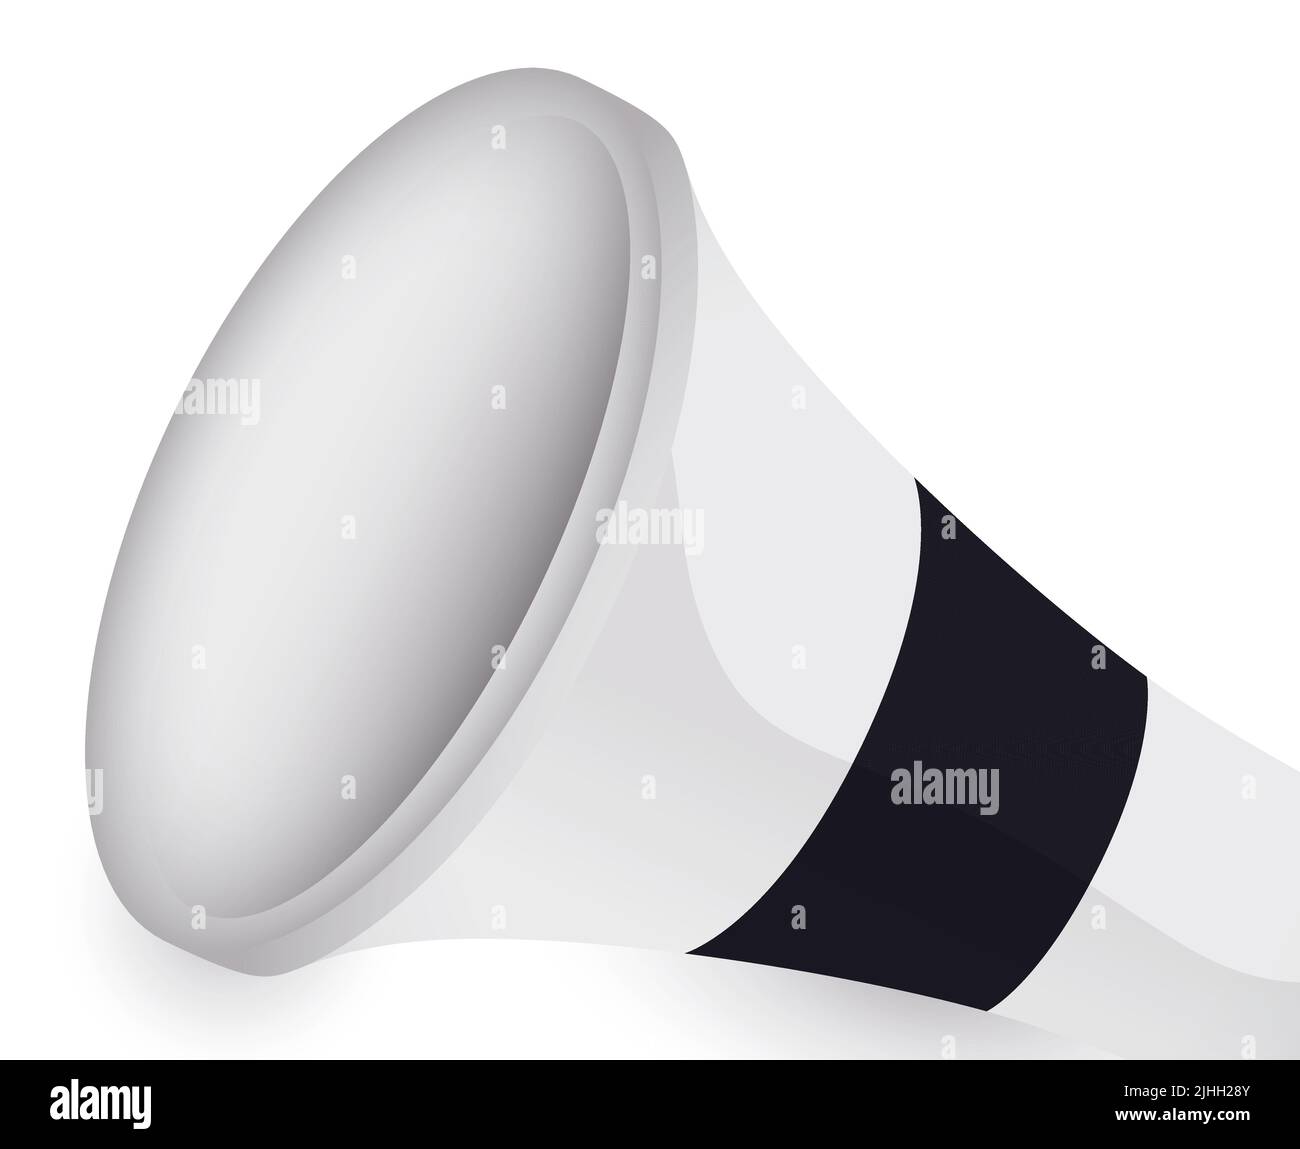 Close up view of sports noisemaker or party horn with black and broad stripe, isolated over white background. Stock Vector